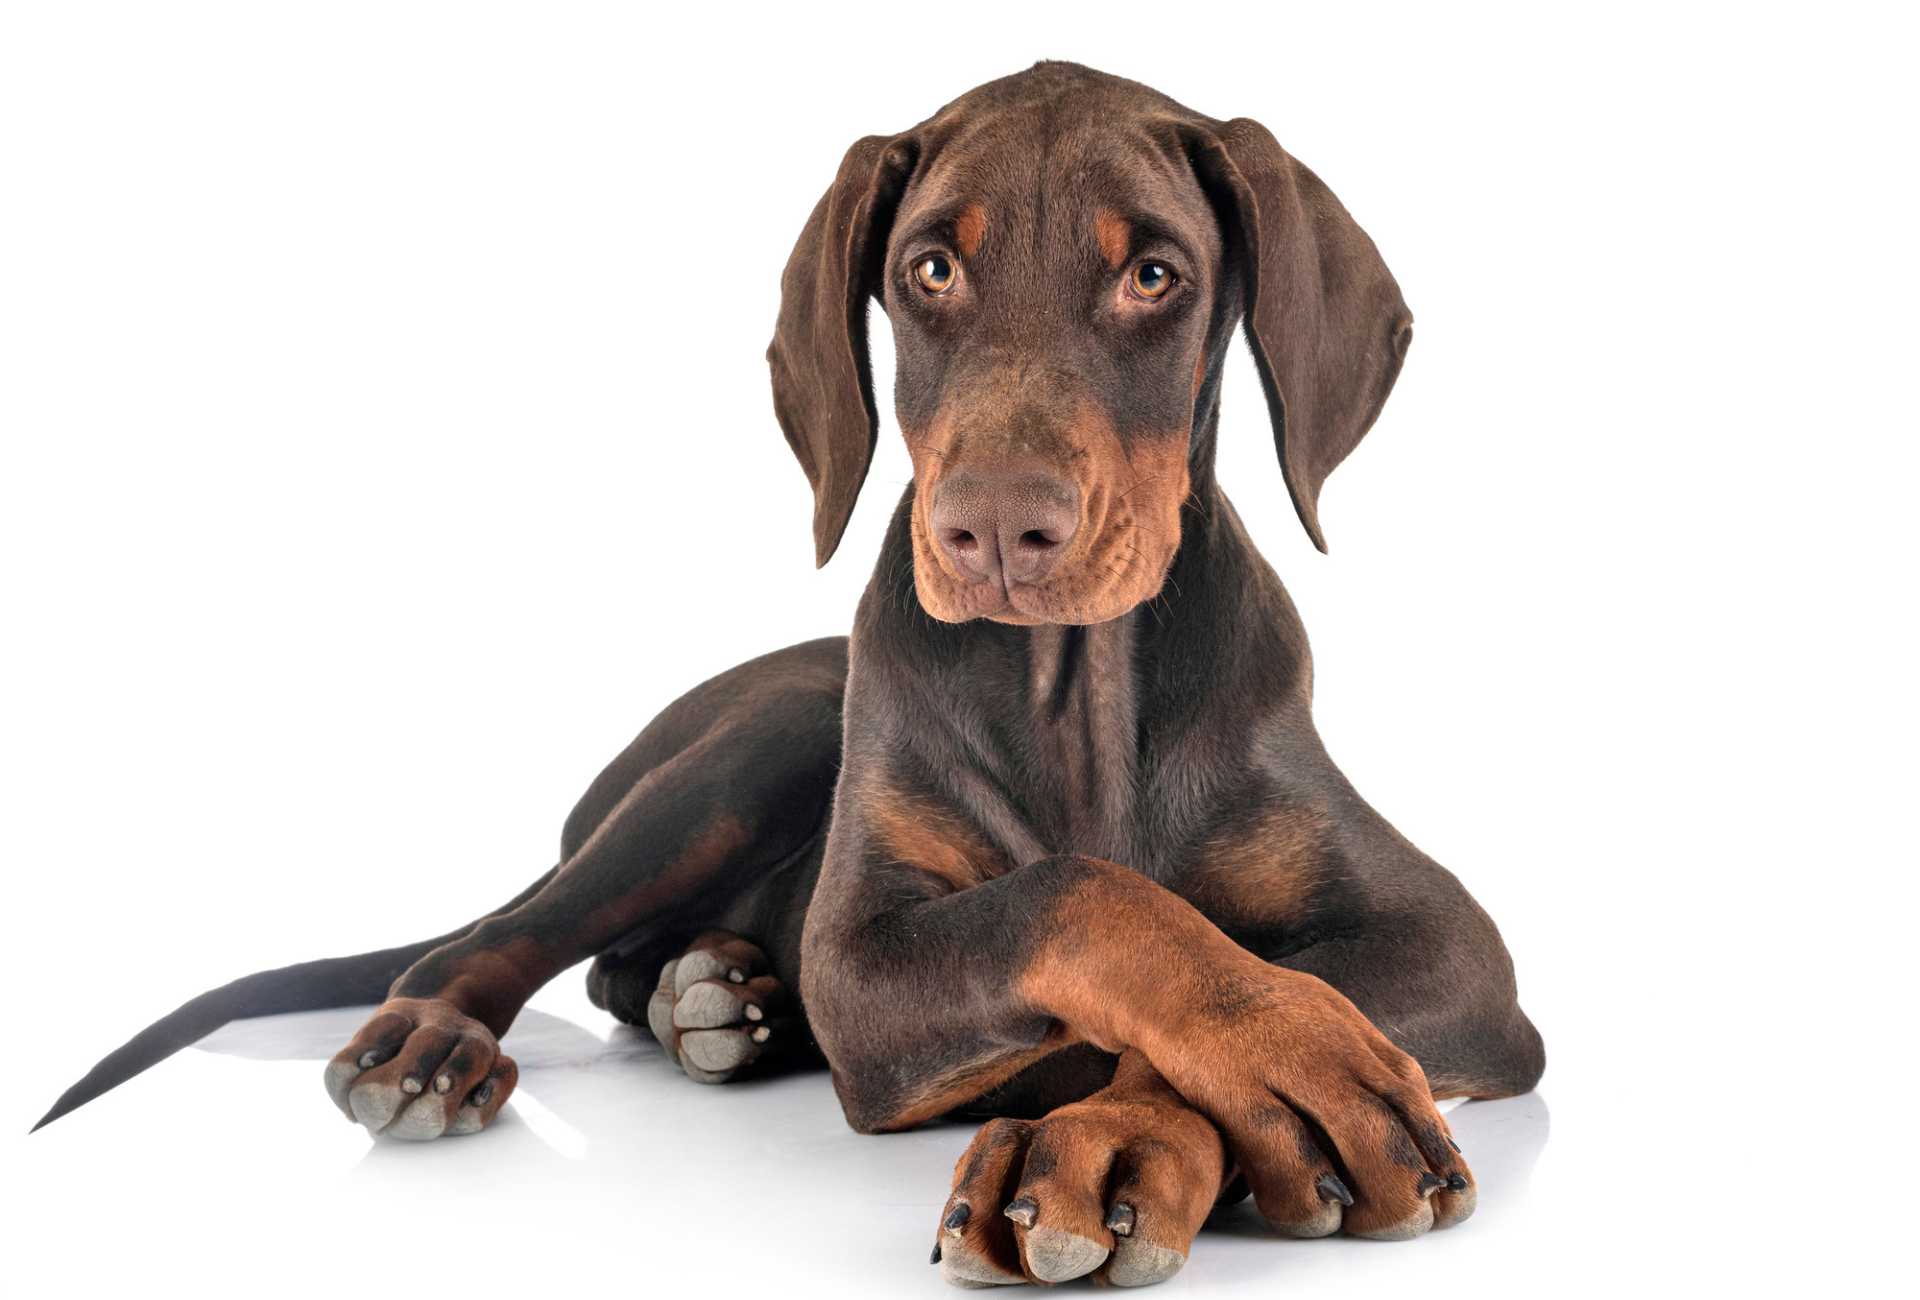 Doberman puppy with their paws crossed in front of white background.